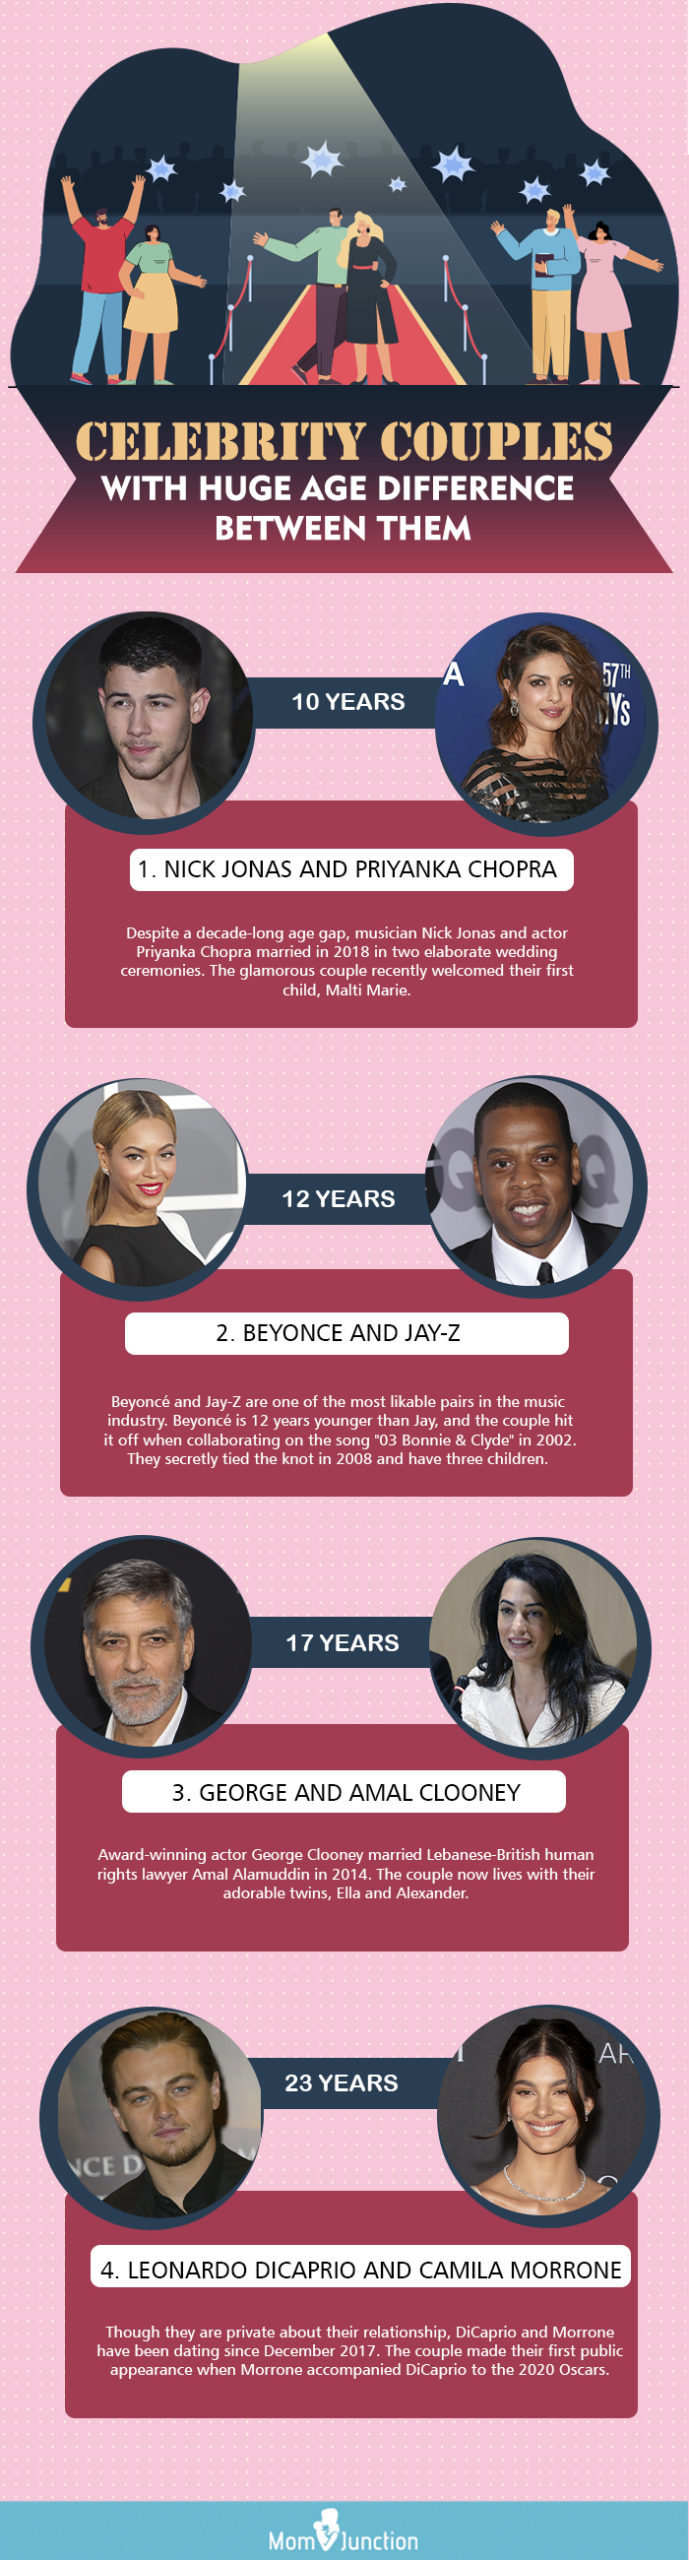 celebrity couples with big age gaps (infographic)